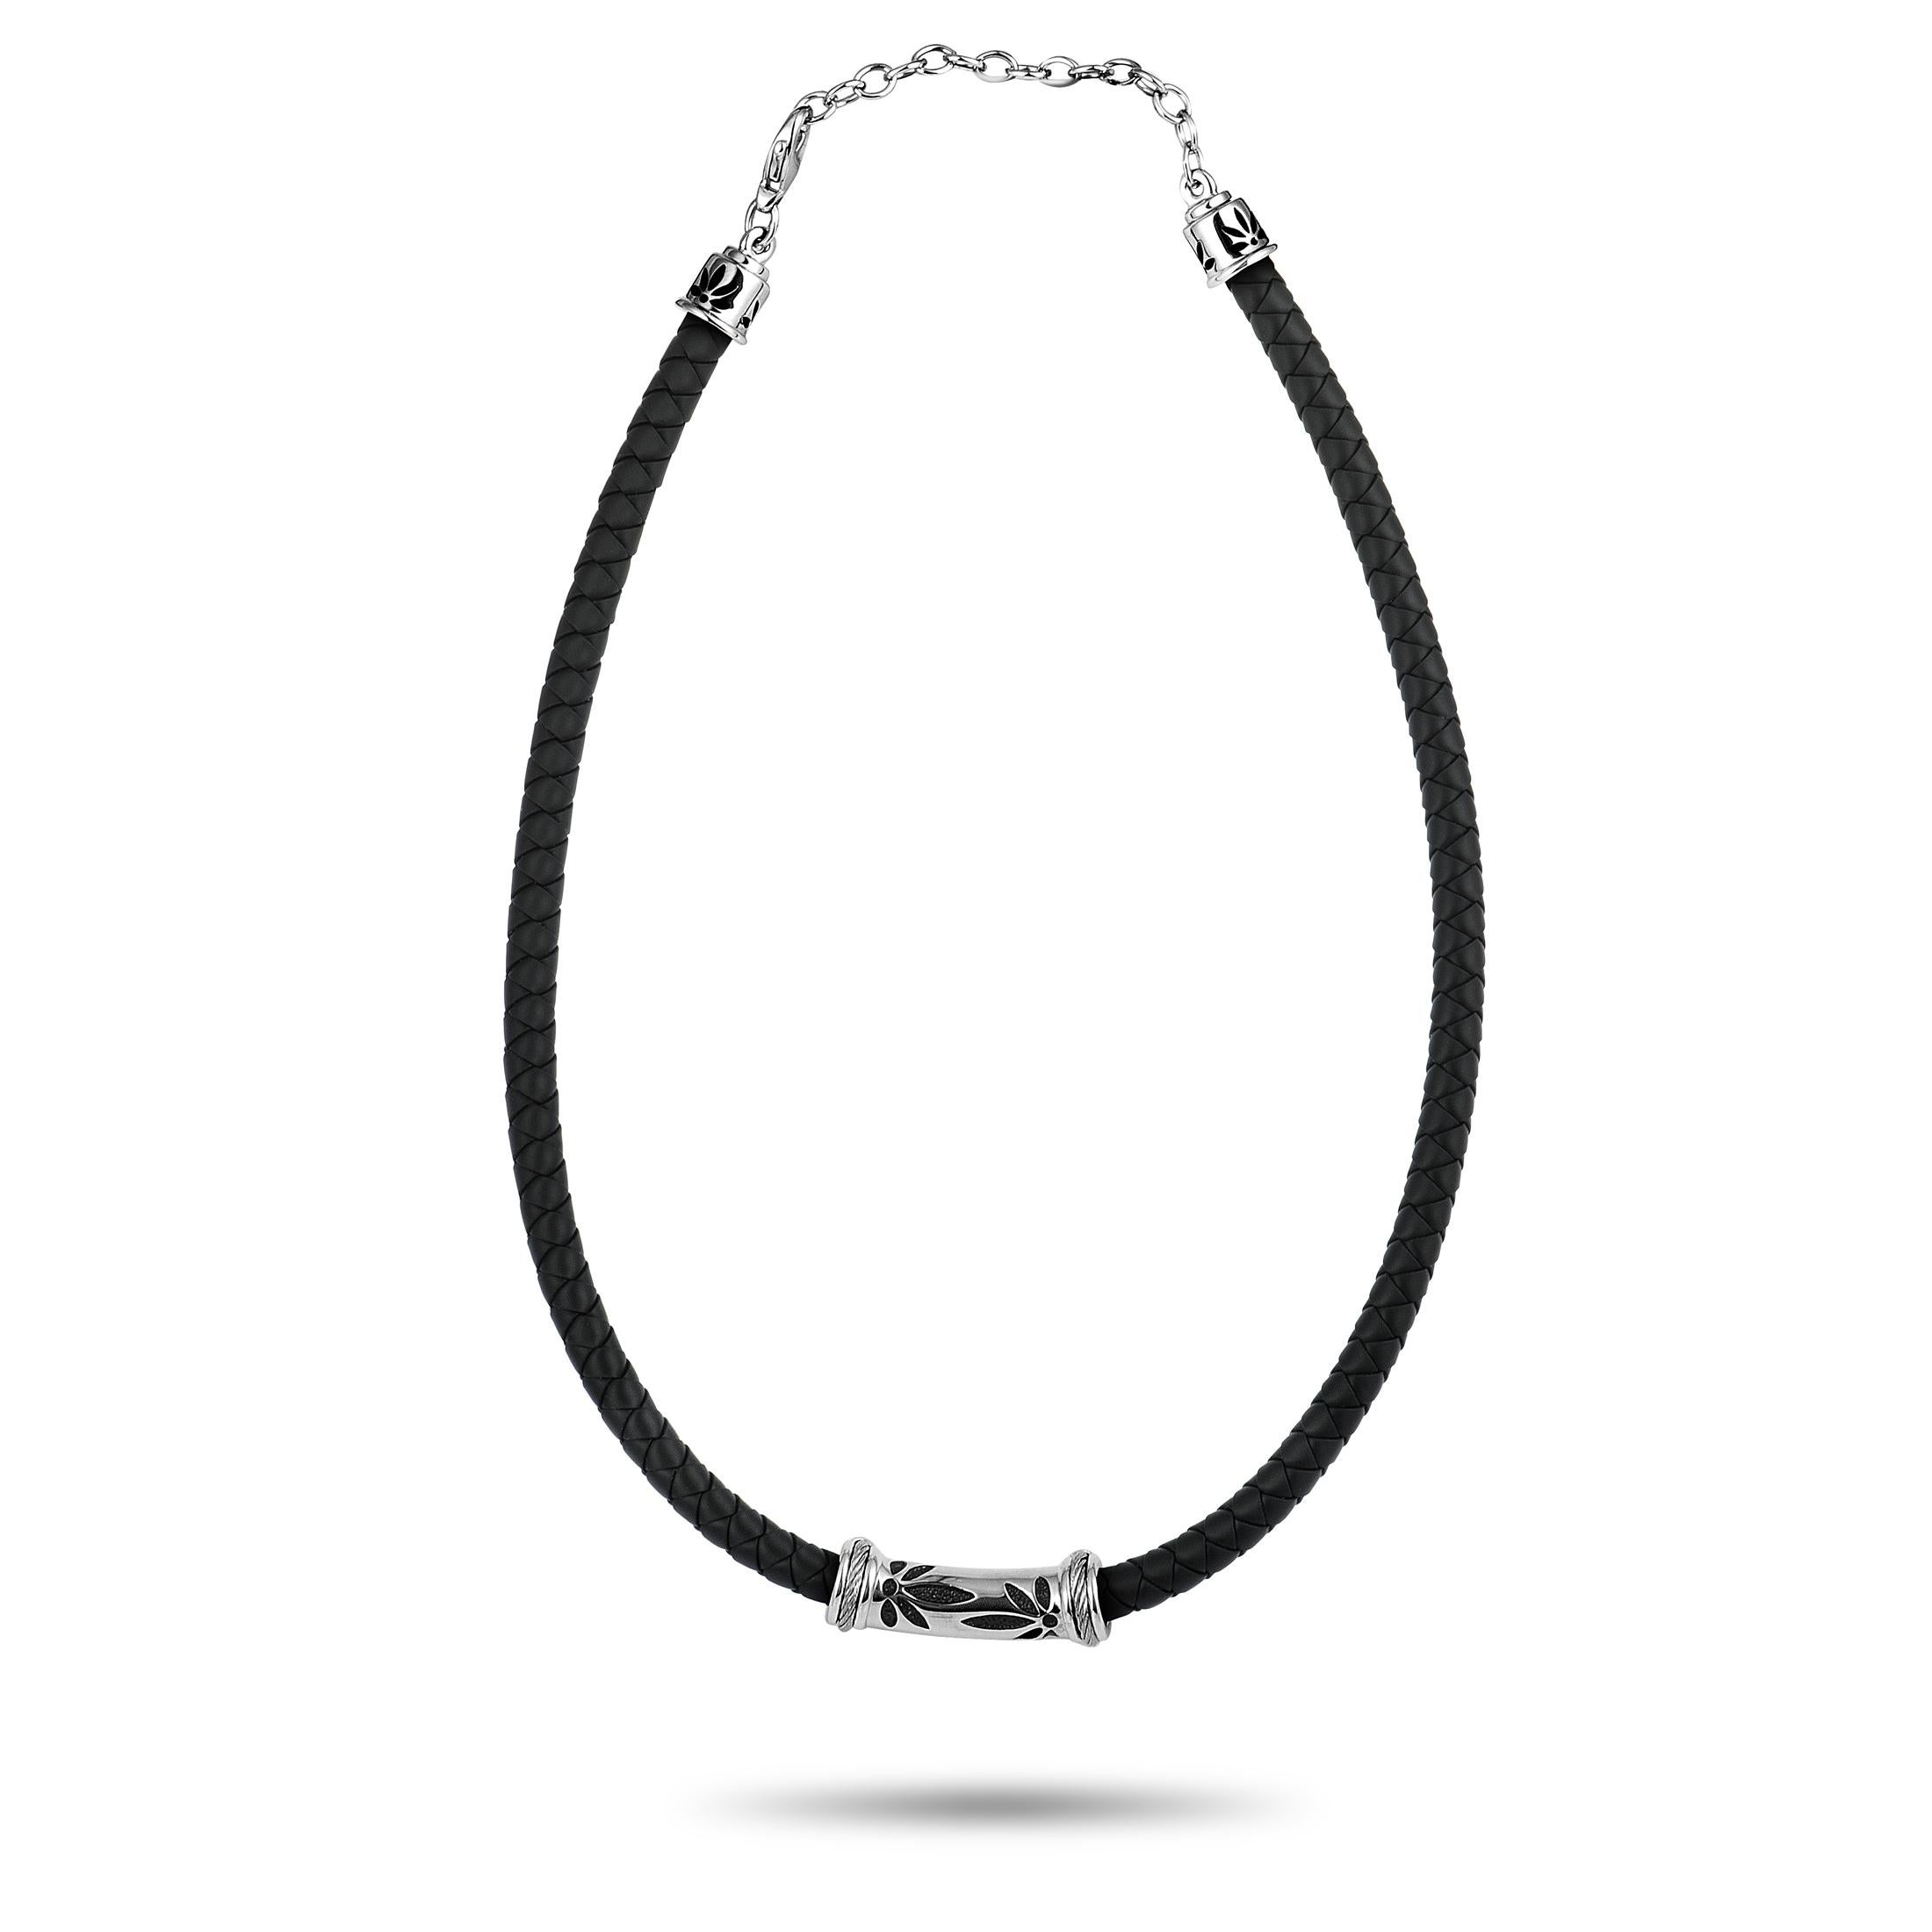 The striking black rubber cord brings out the elegant sheen of stainless steel in an exceptionally eye-catching fashion in this extraordinary “Bamboo” necklace that is presented by Charriol. The necklace weighs 24.1 grams.
Charriol Bamboo Stainless